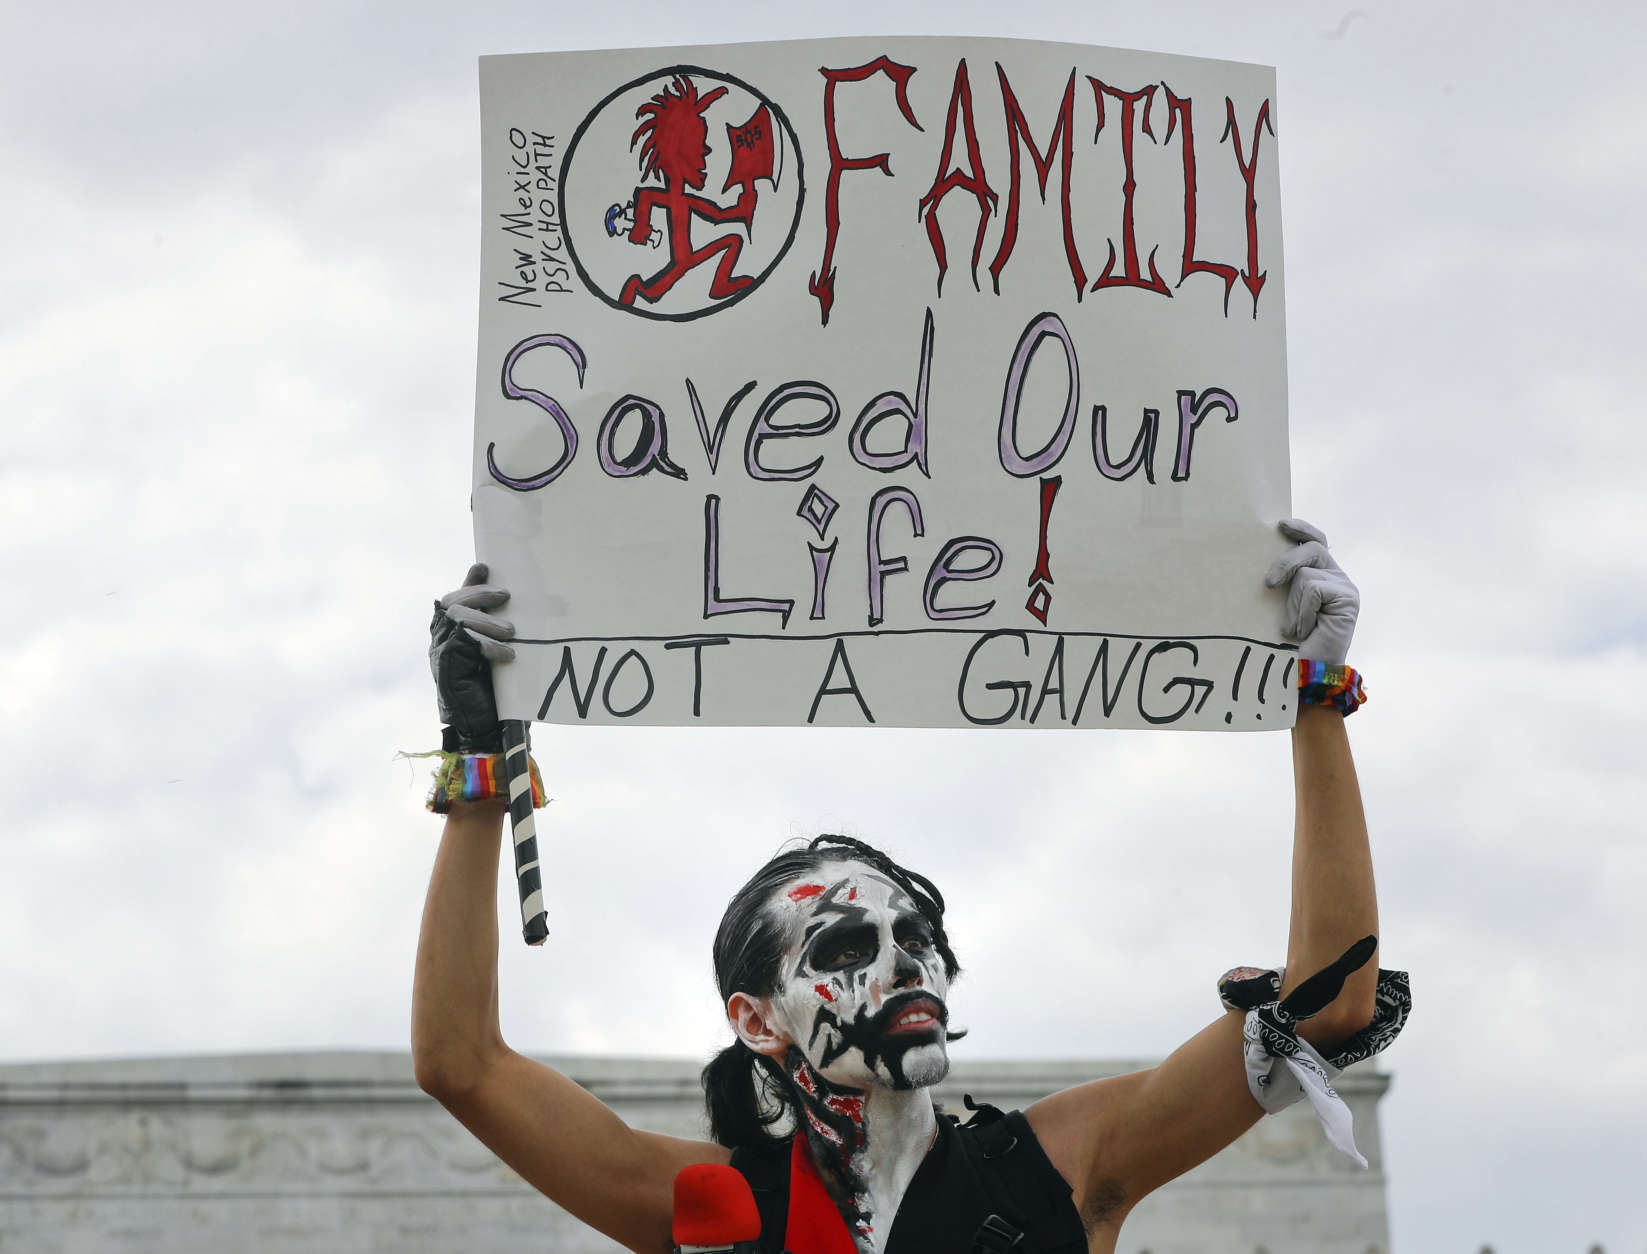 Fonz Tobin, 25, from Albuquerque, N.M., holds up a sign in front of the Lincoln Memorial in Washington, as he joins other supporters of the rap group Insane Clown Posse, during a rally Saturday, Sept. 16, 2017, to protest and demand that the FBI rescind its classification of the juggalos as "loosely organized hybrid gang."(AP Photo/Pablo Martinez Monsivais)